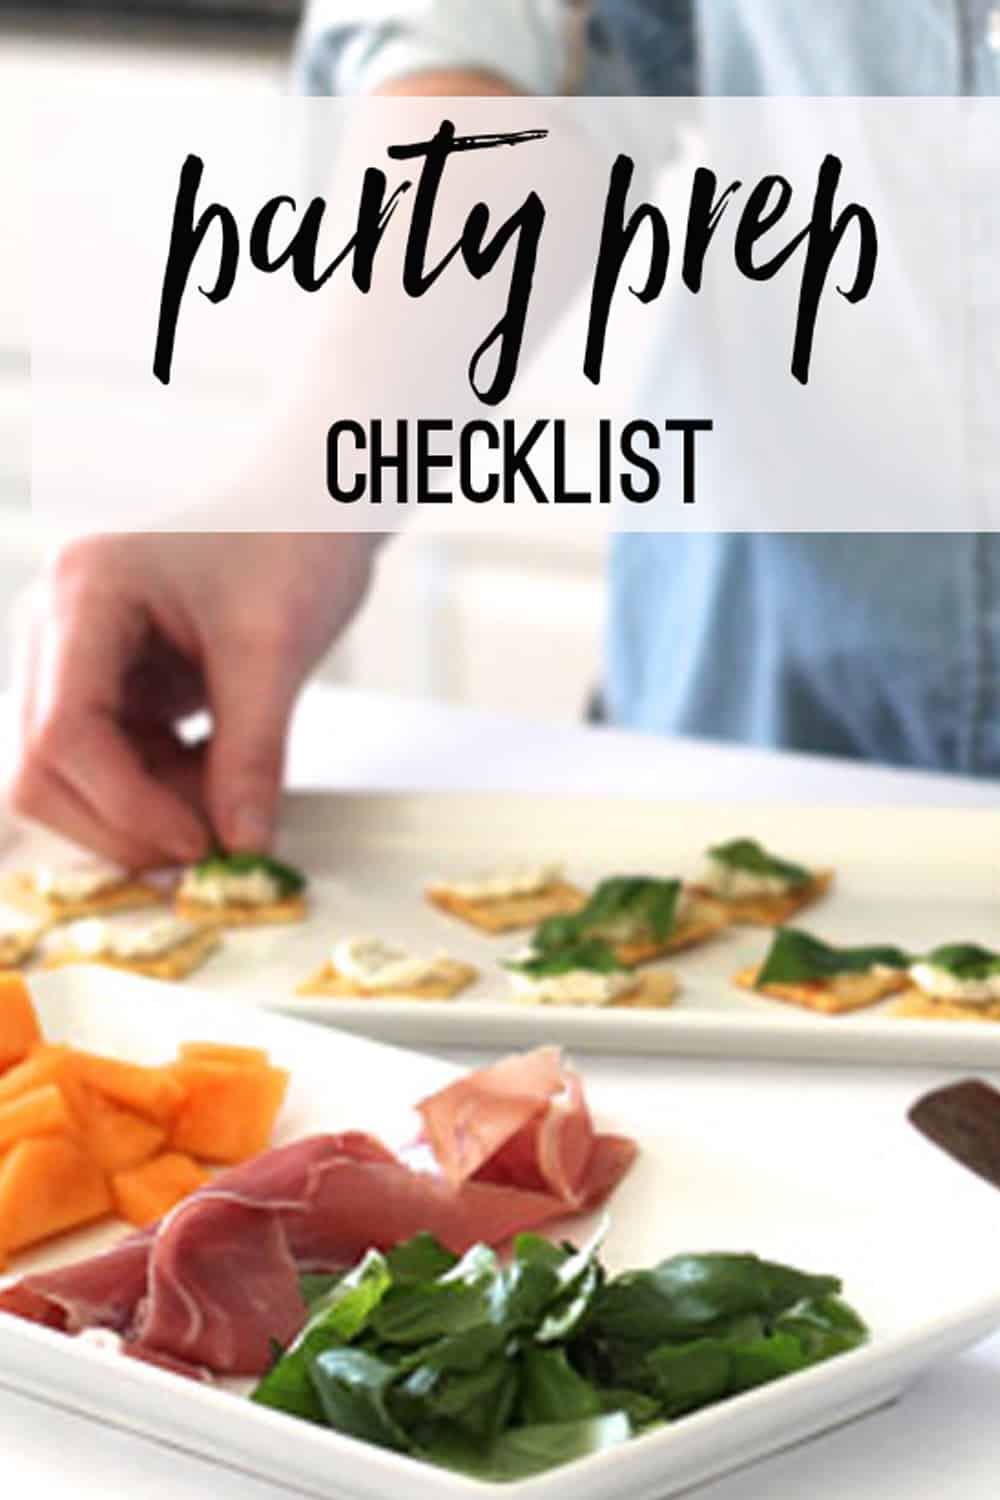 How To Prepare For A Party 10 Simple Steps to Prepare for Your Party | Thoughtfully Simple